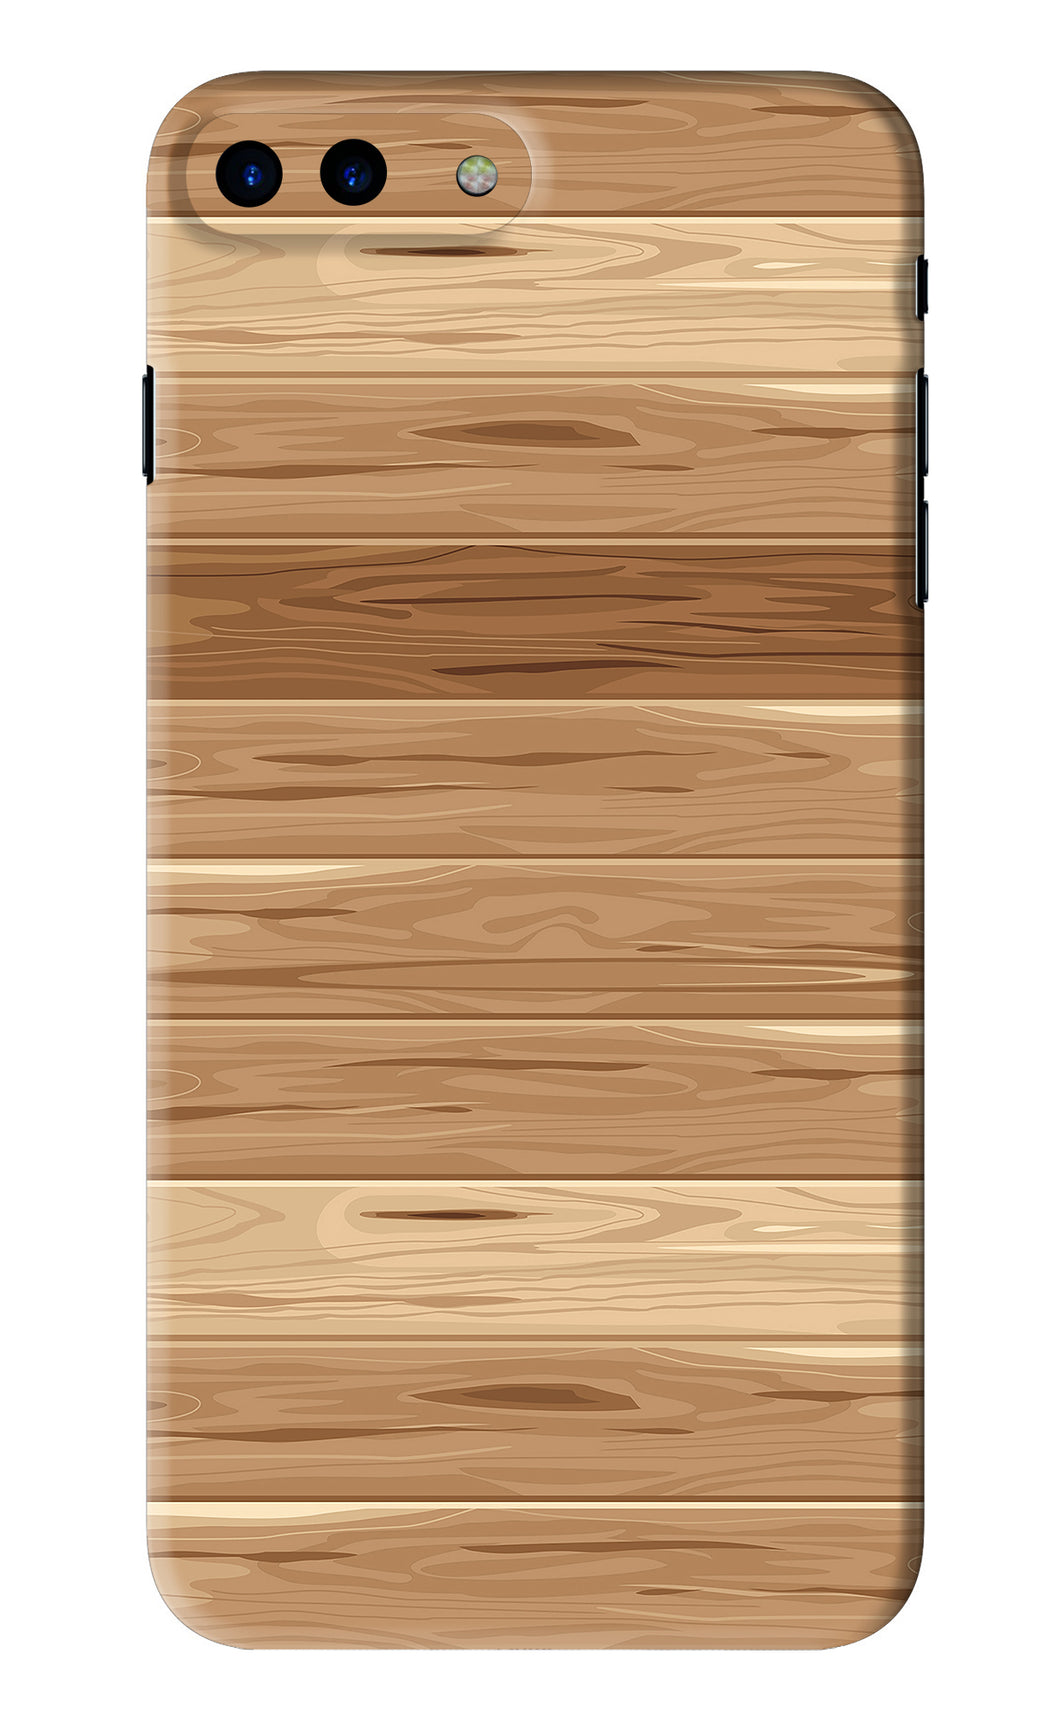 Wooden Vector iPhone 7 Plus Back Skin Wrap